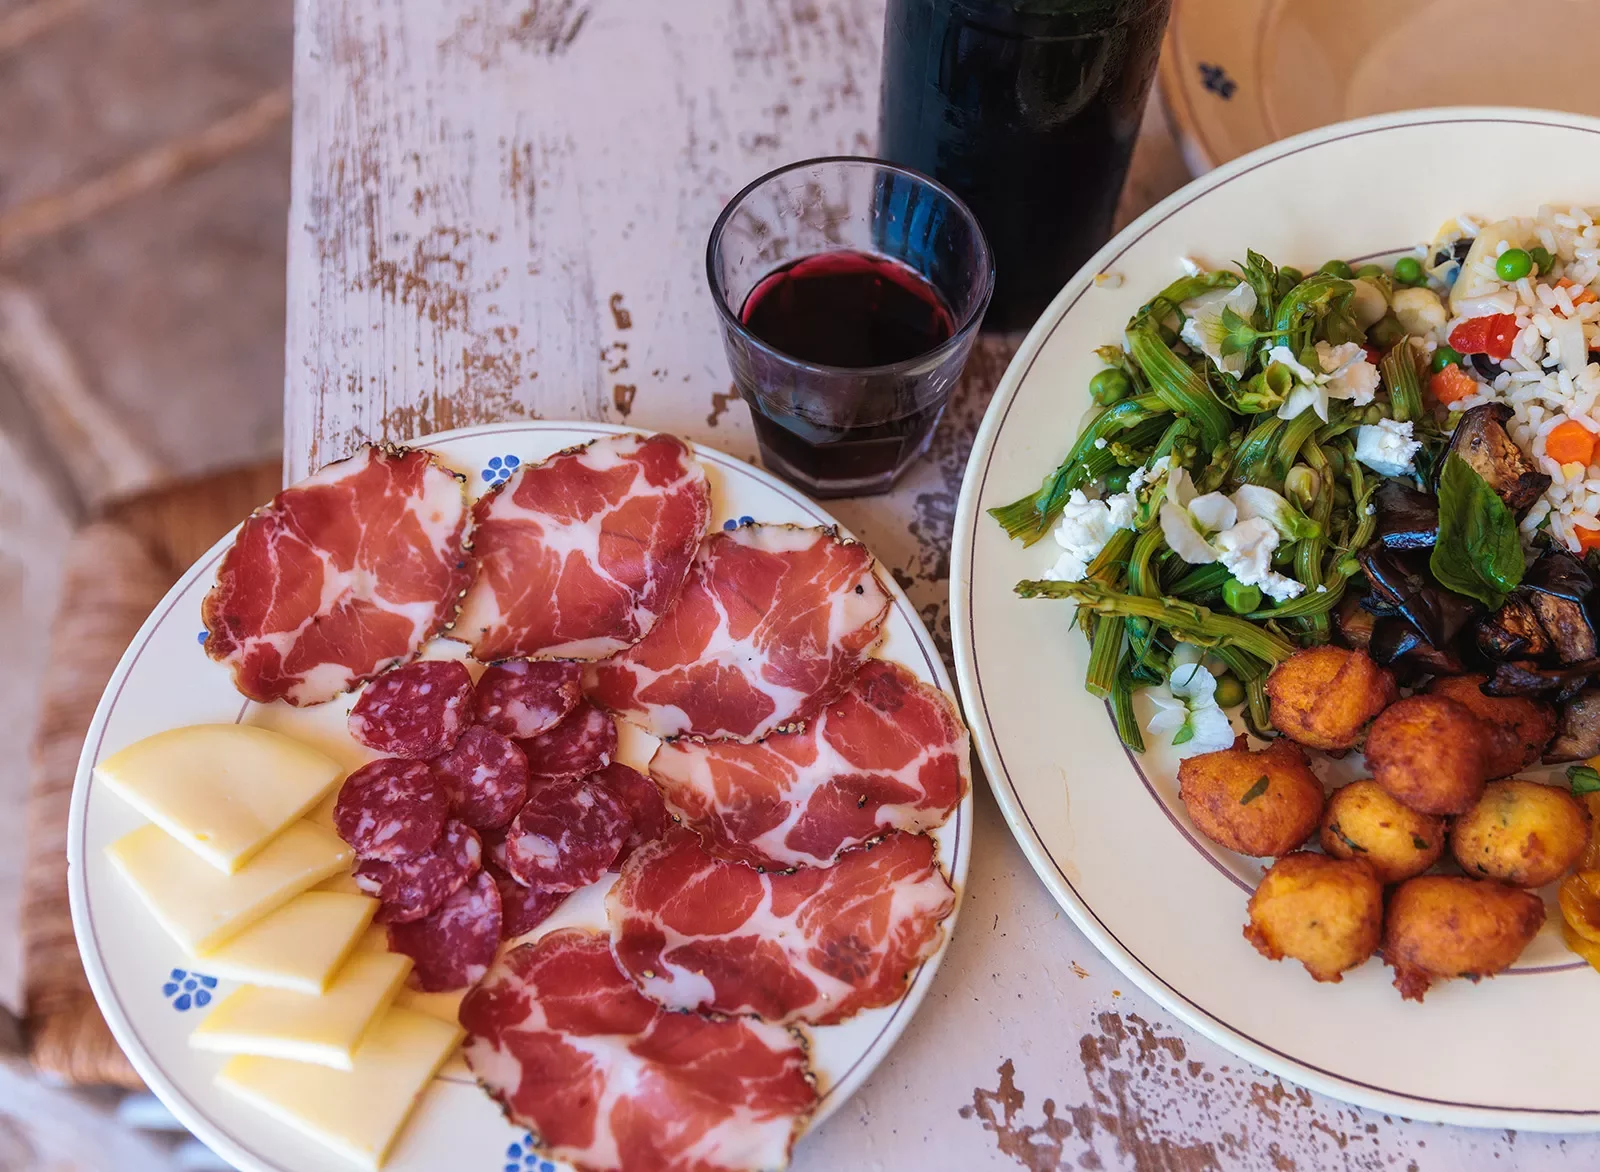 Plates full of cured meats, cheeses and salad